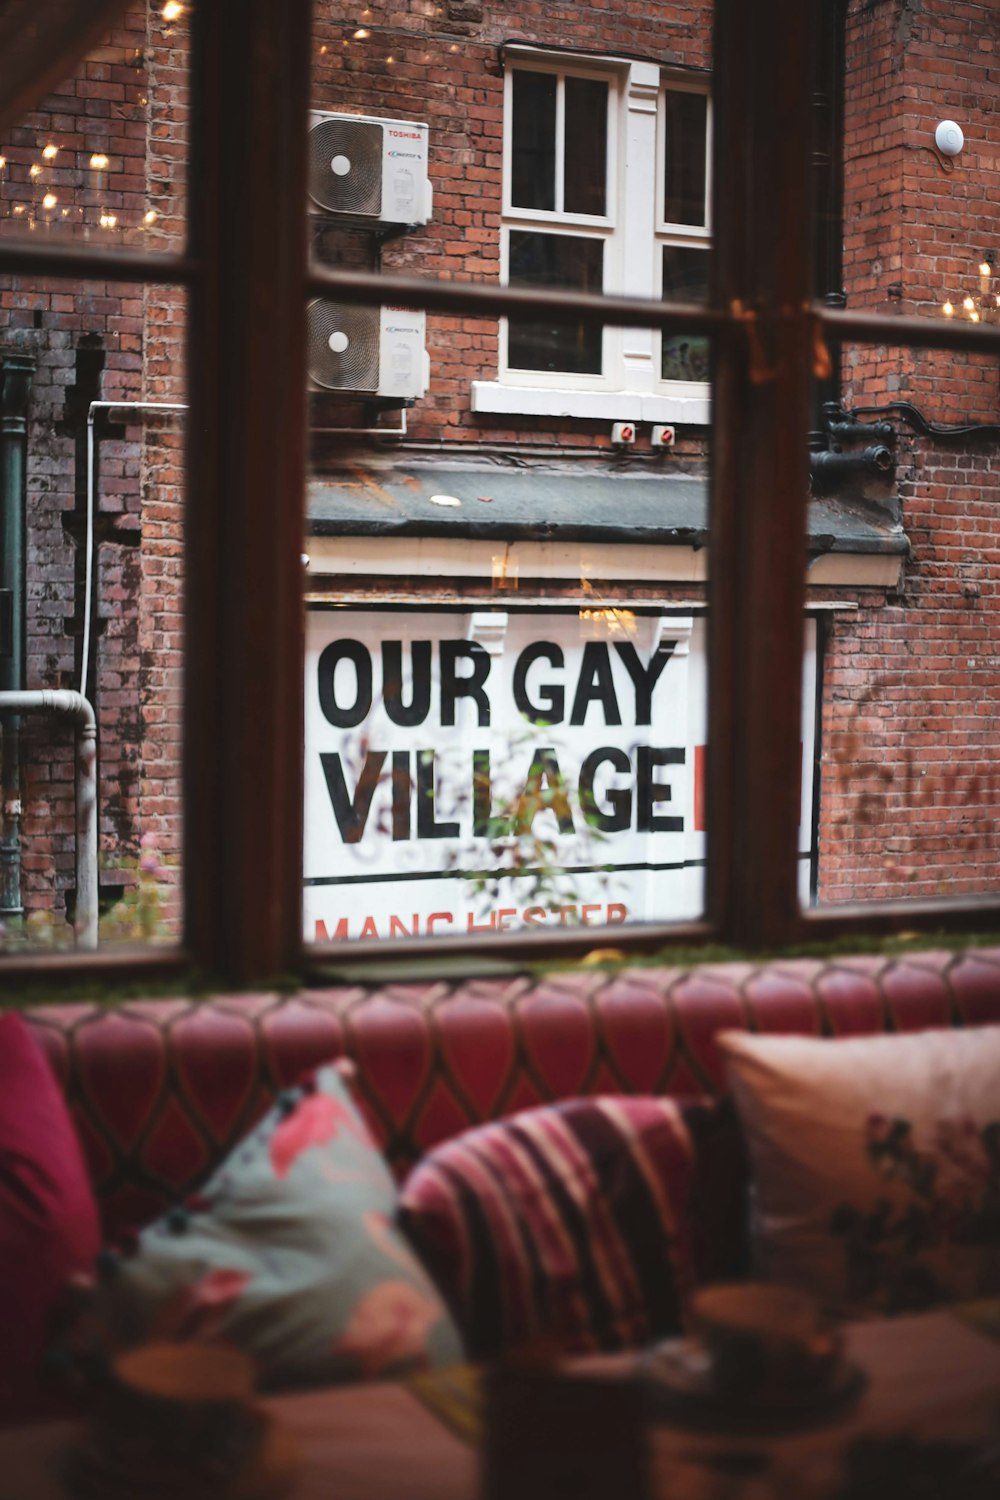 Our Gay Village Sign seen through window